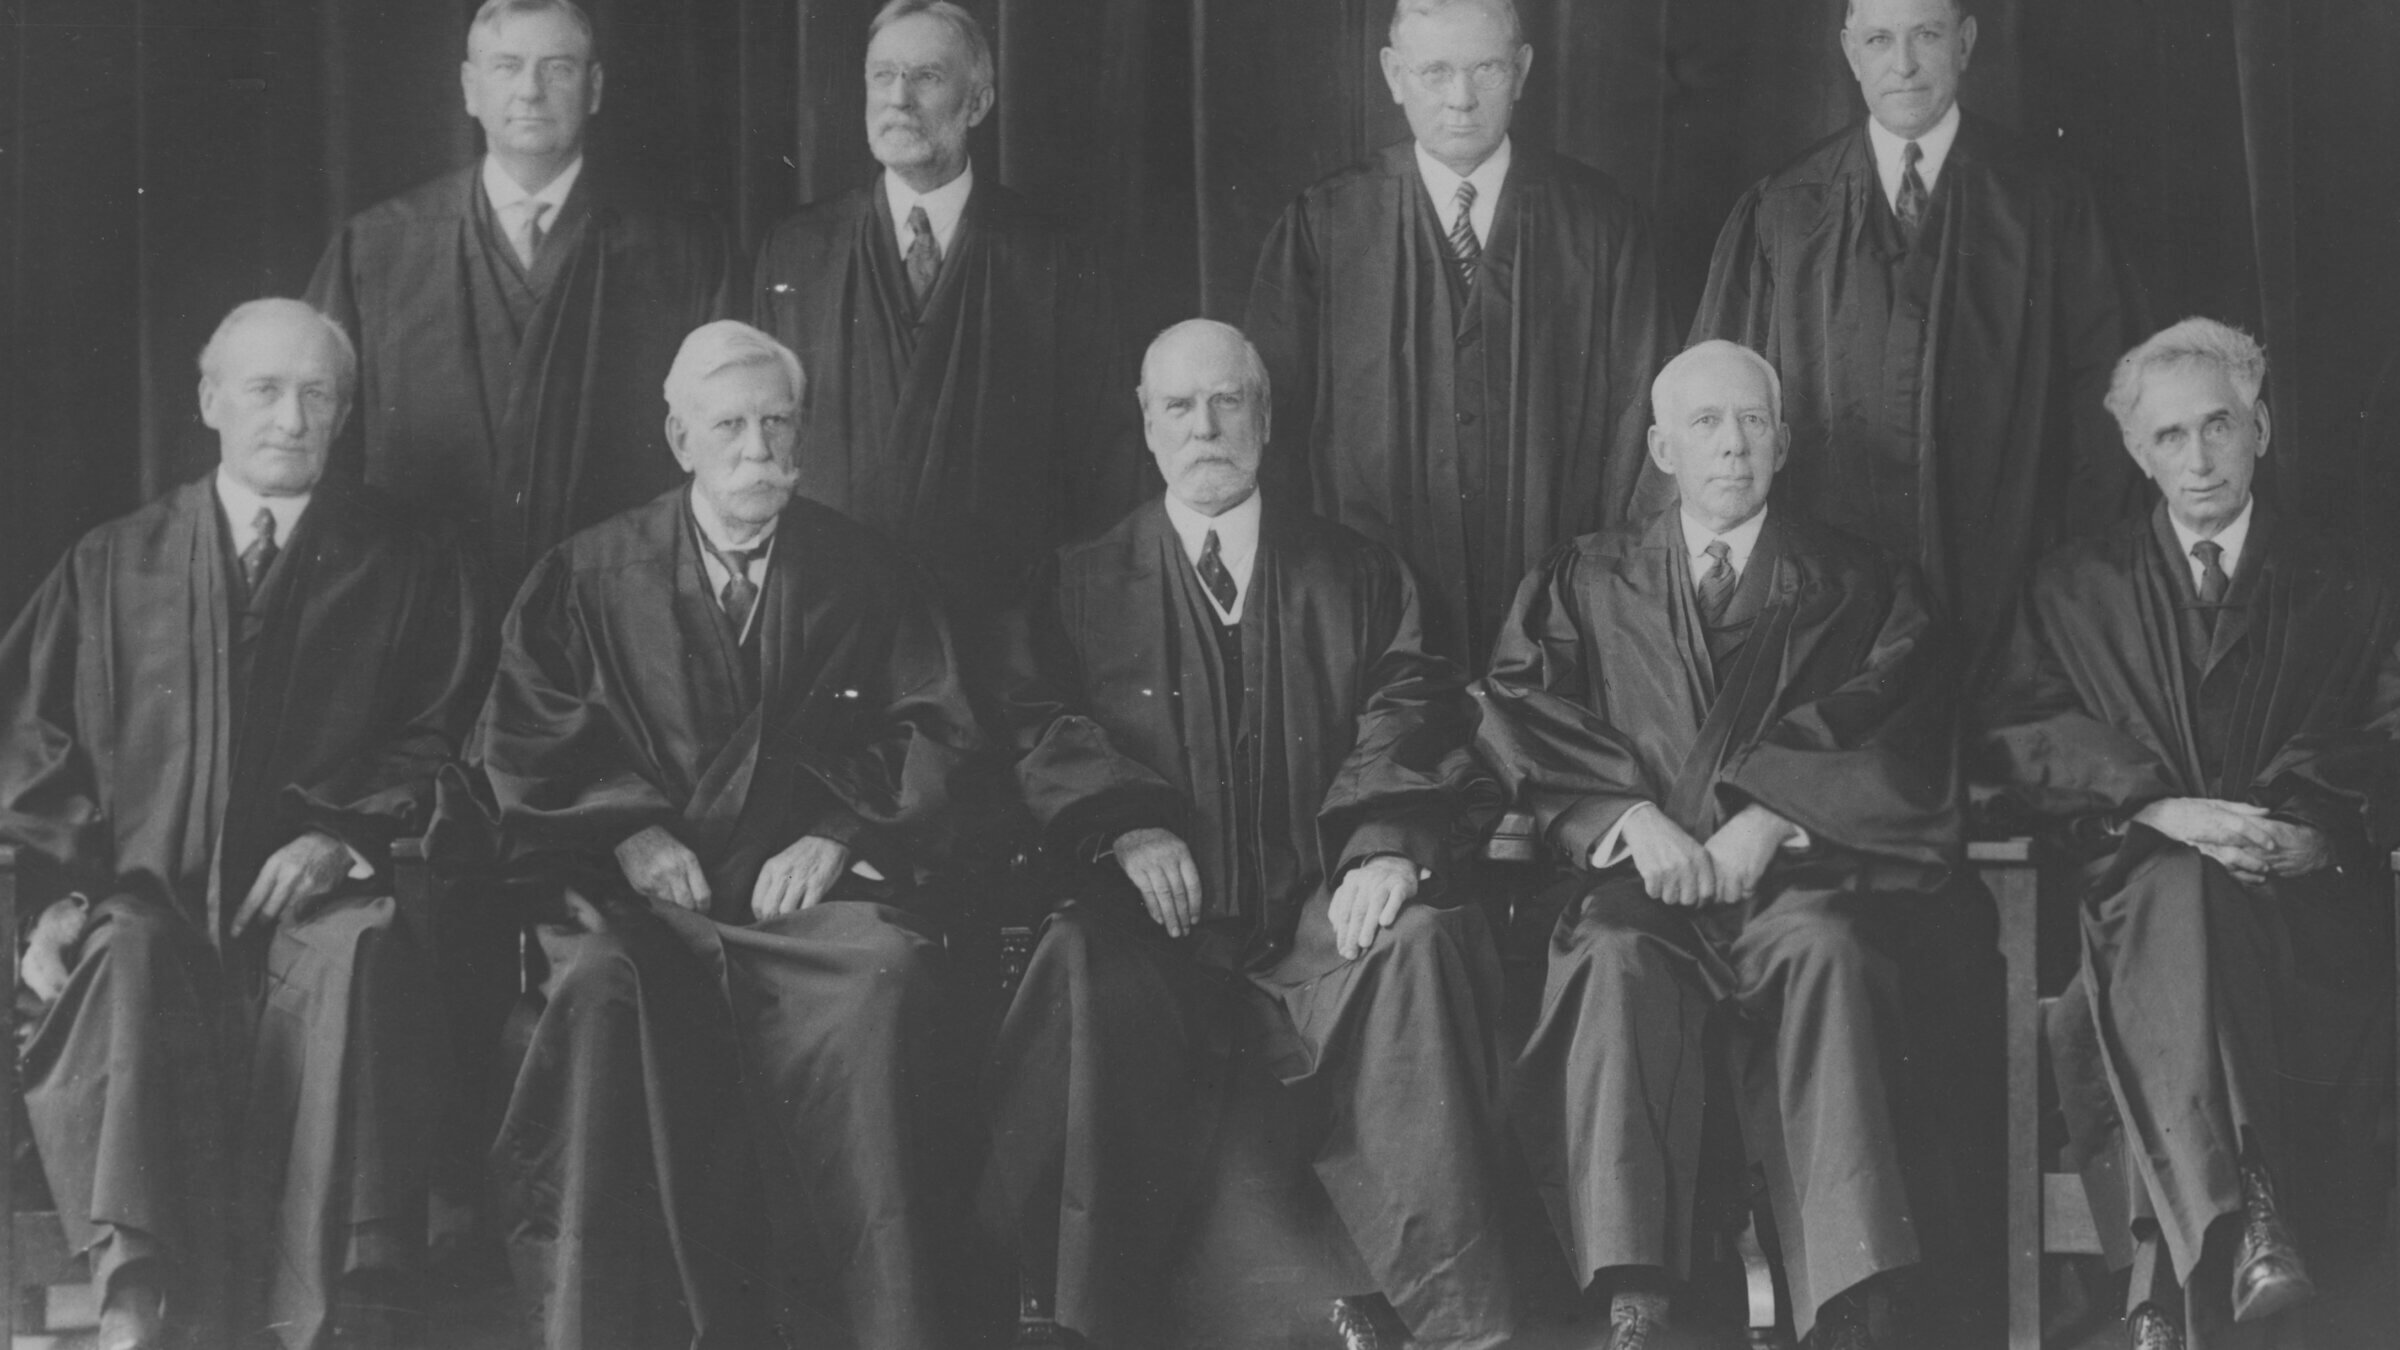 Black and white photo of Supreme Court justices, 1930